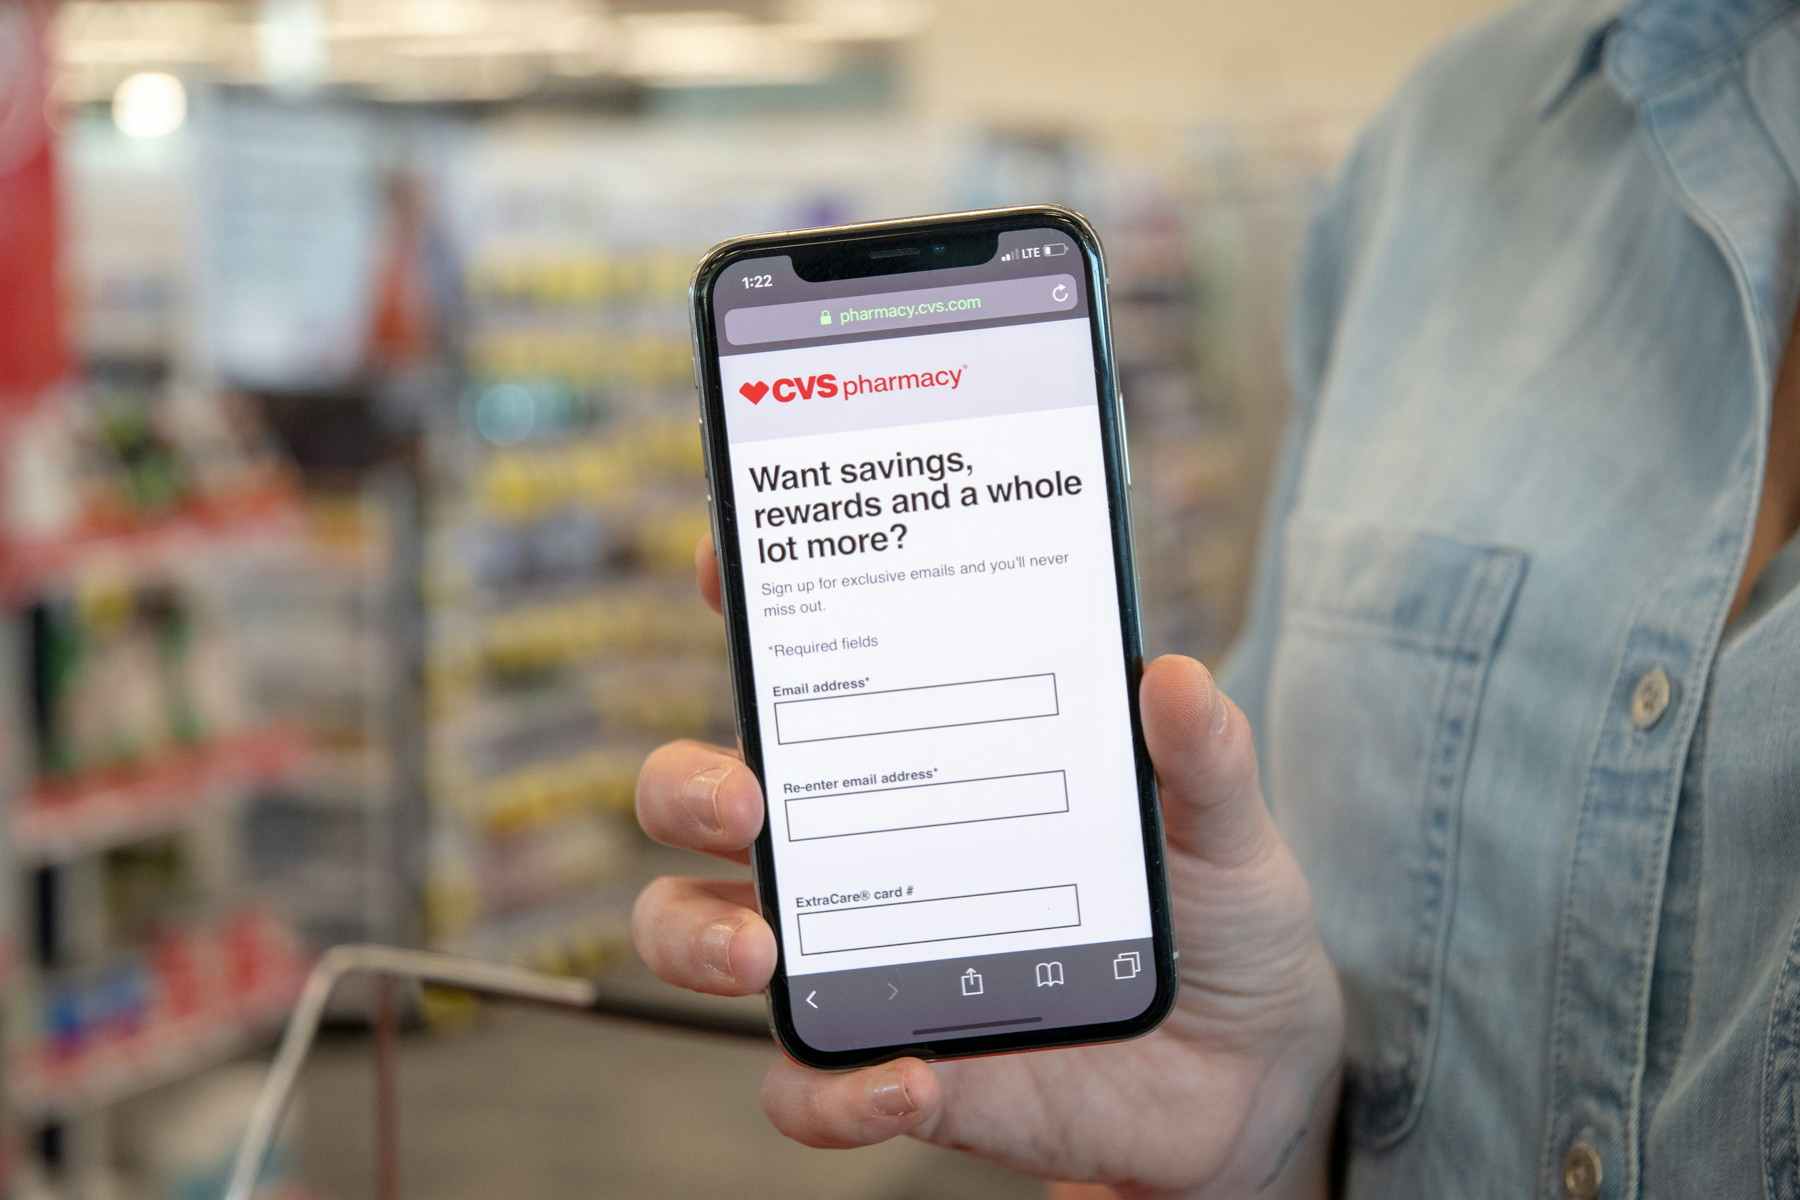 Get coupons emailed to you through CVS.